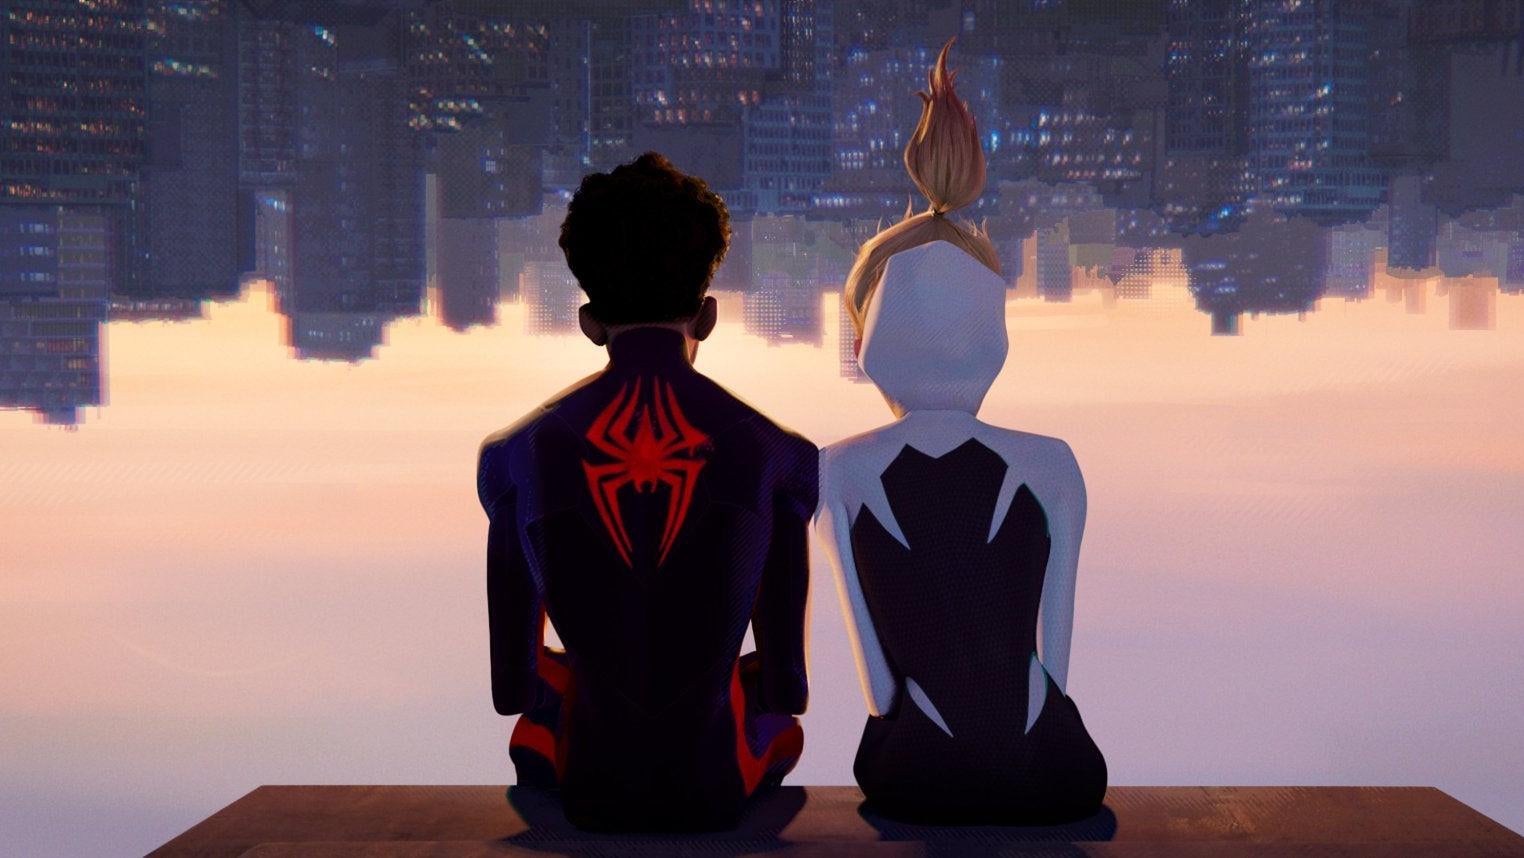 Hang around until next week and the new Across the Spider-Verse trailer. (Image: Sony)